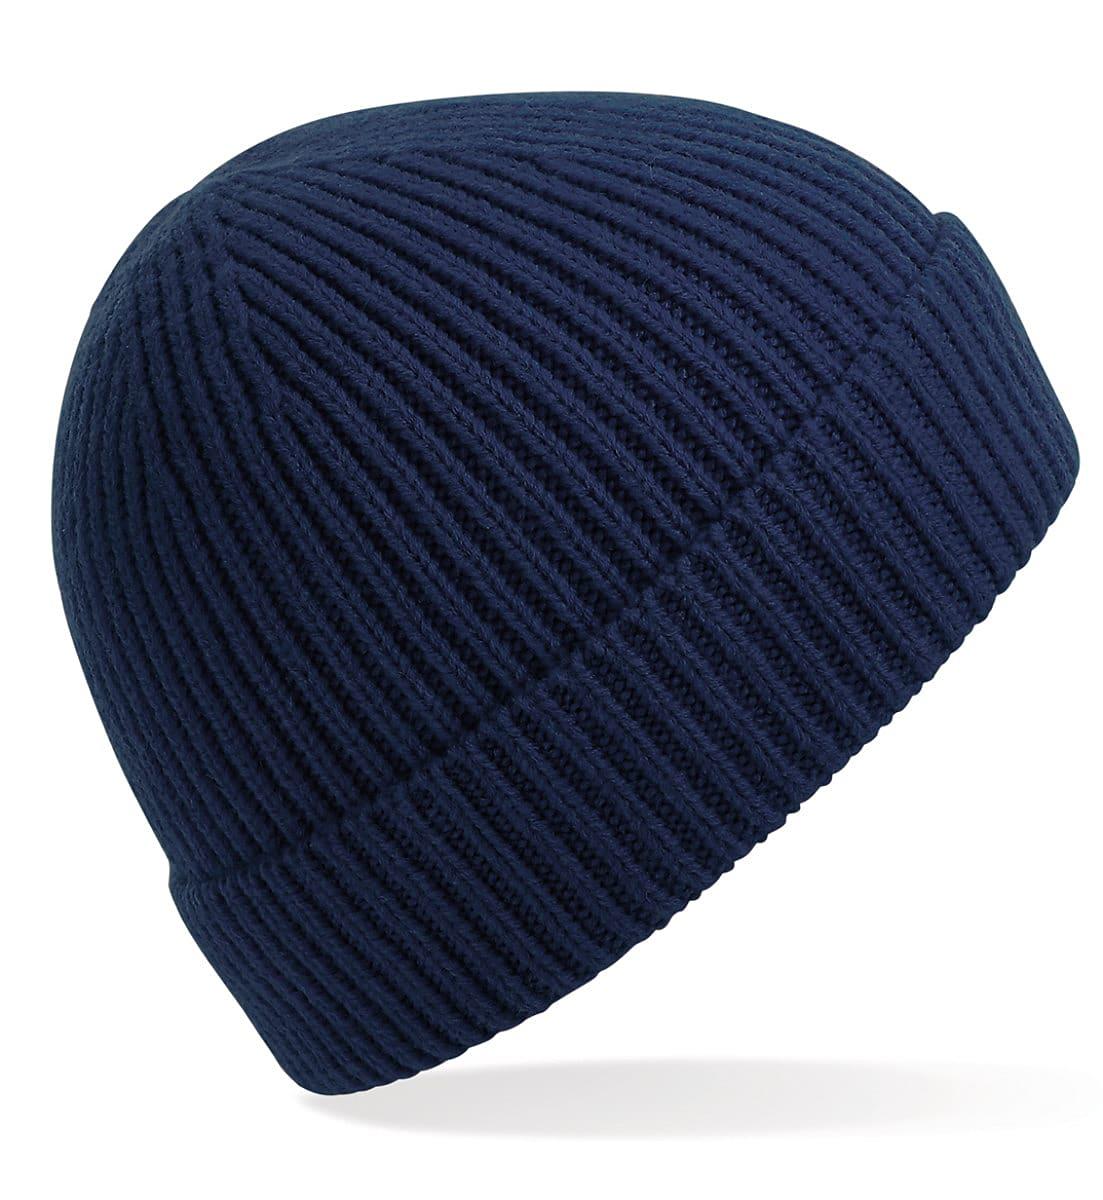 Beechfield Engineered Knit Ribbed Beanie Hat in Oxford Navy (Product Code: B380)